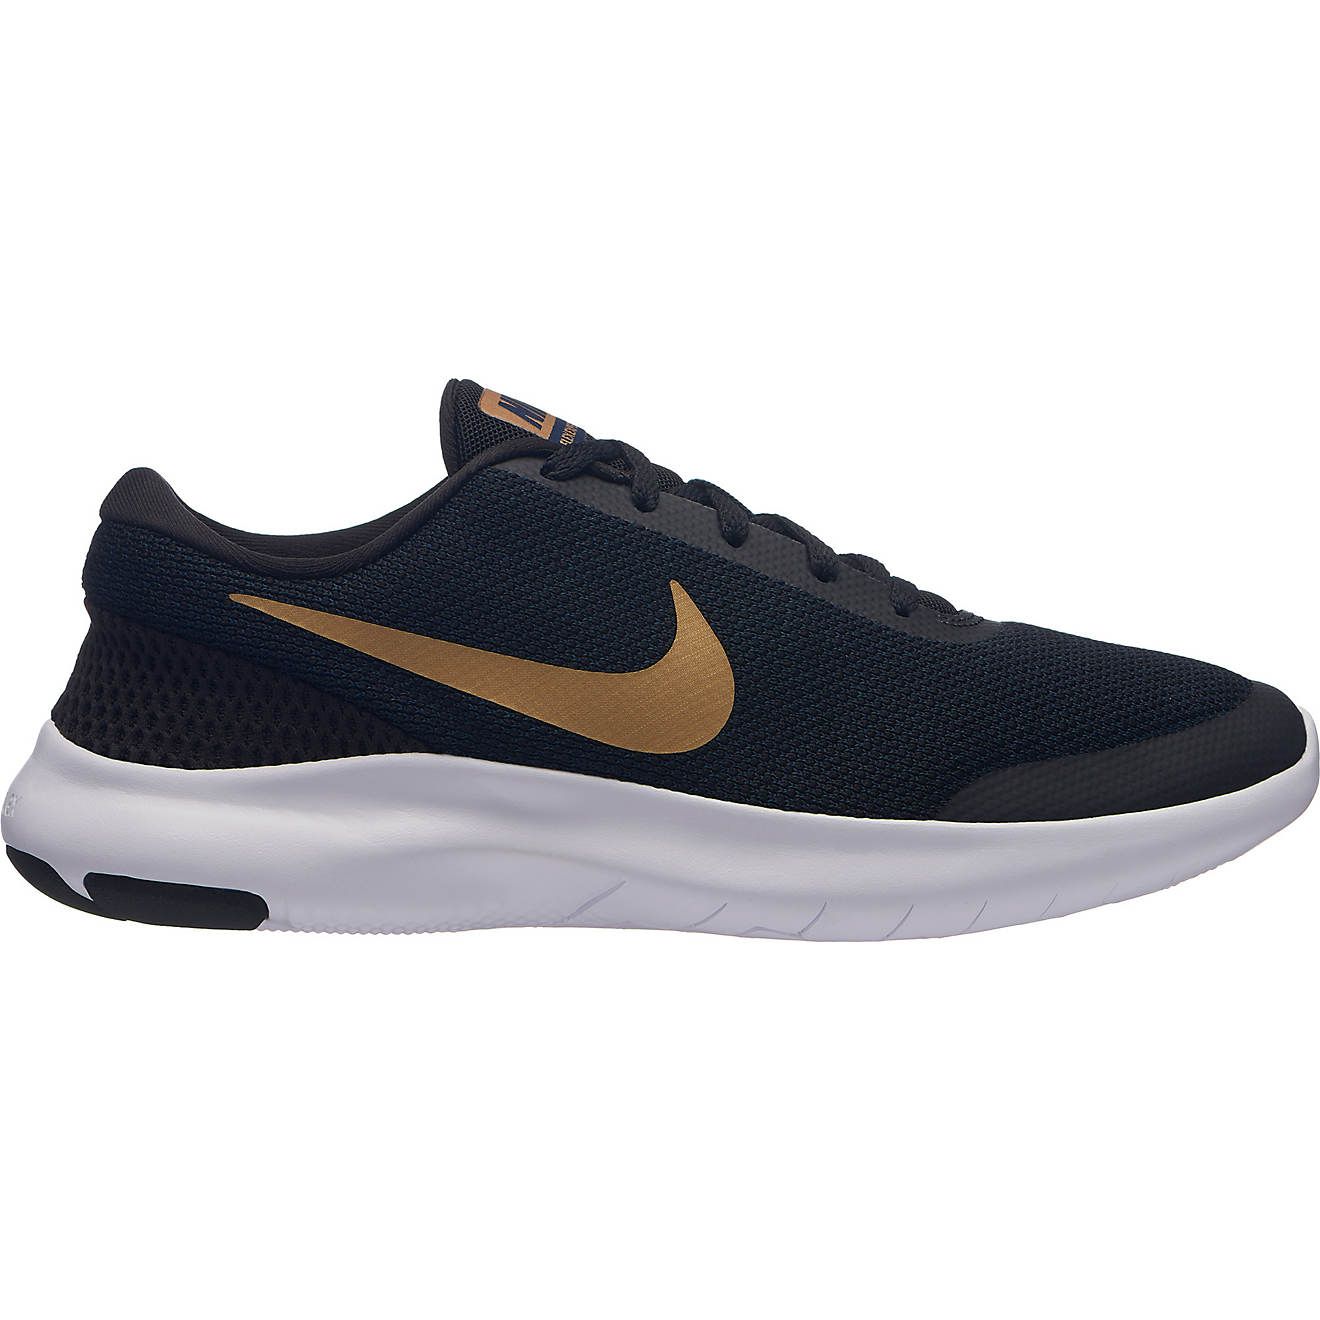 Nike Women's Flex Experience RN 7 Running Shoes | Academy | Academy Sports + Outdoors